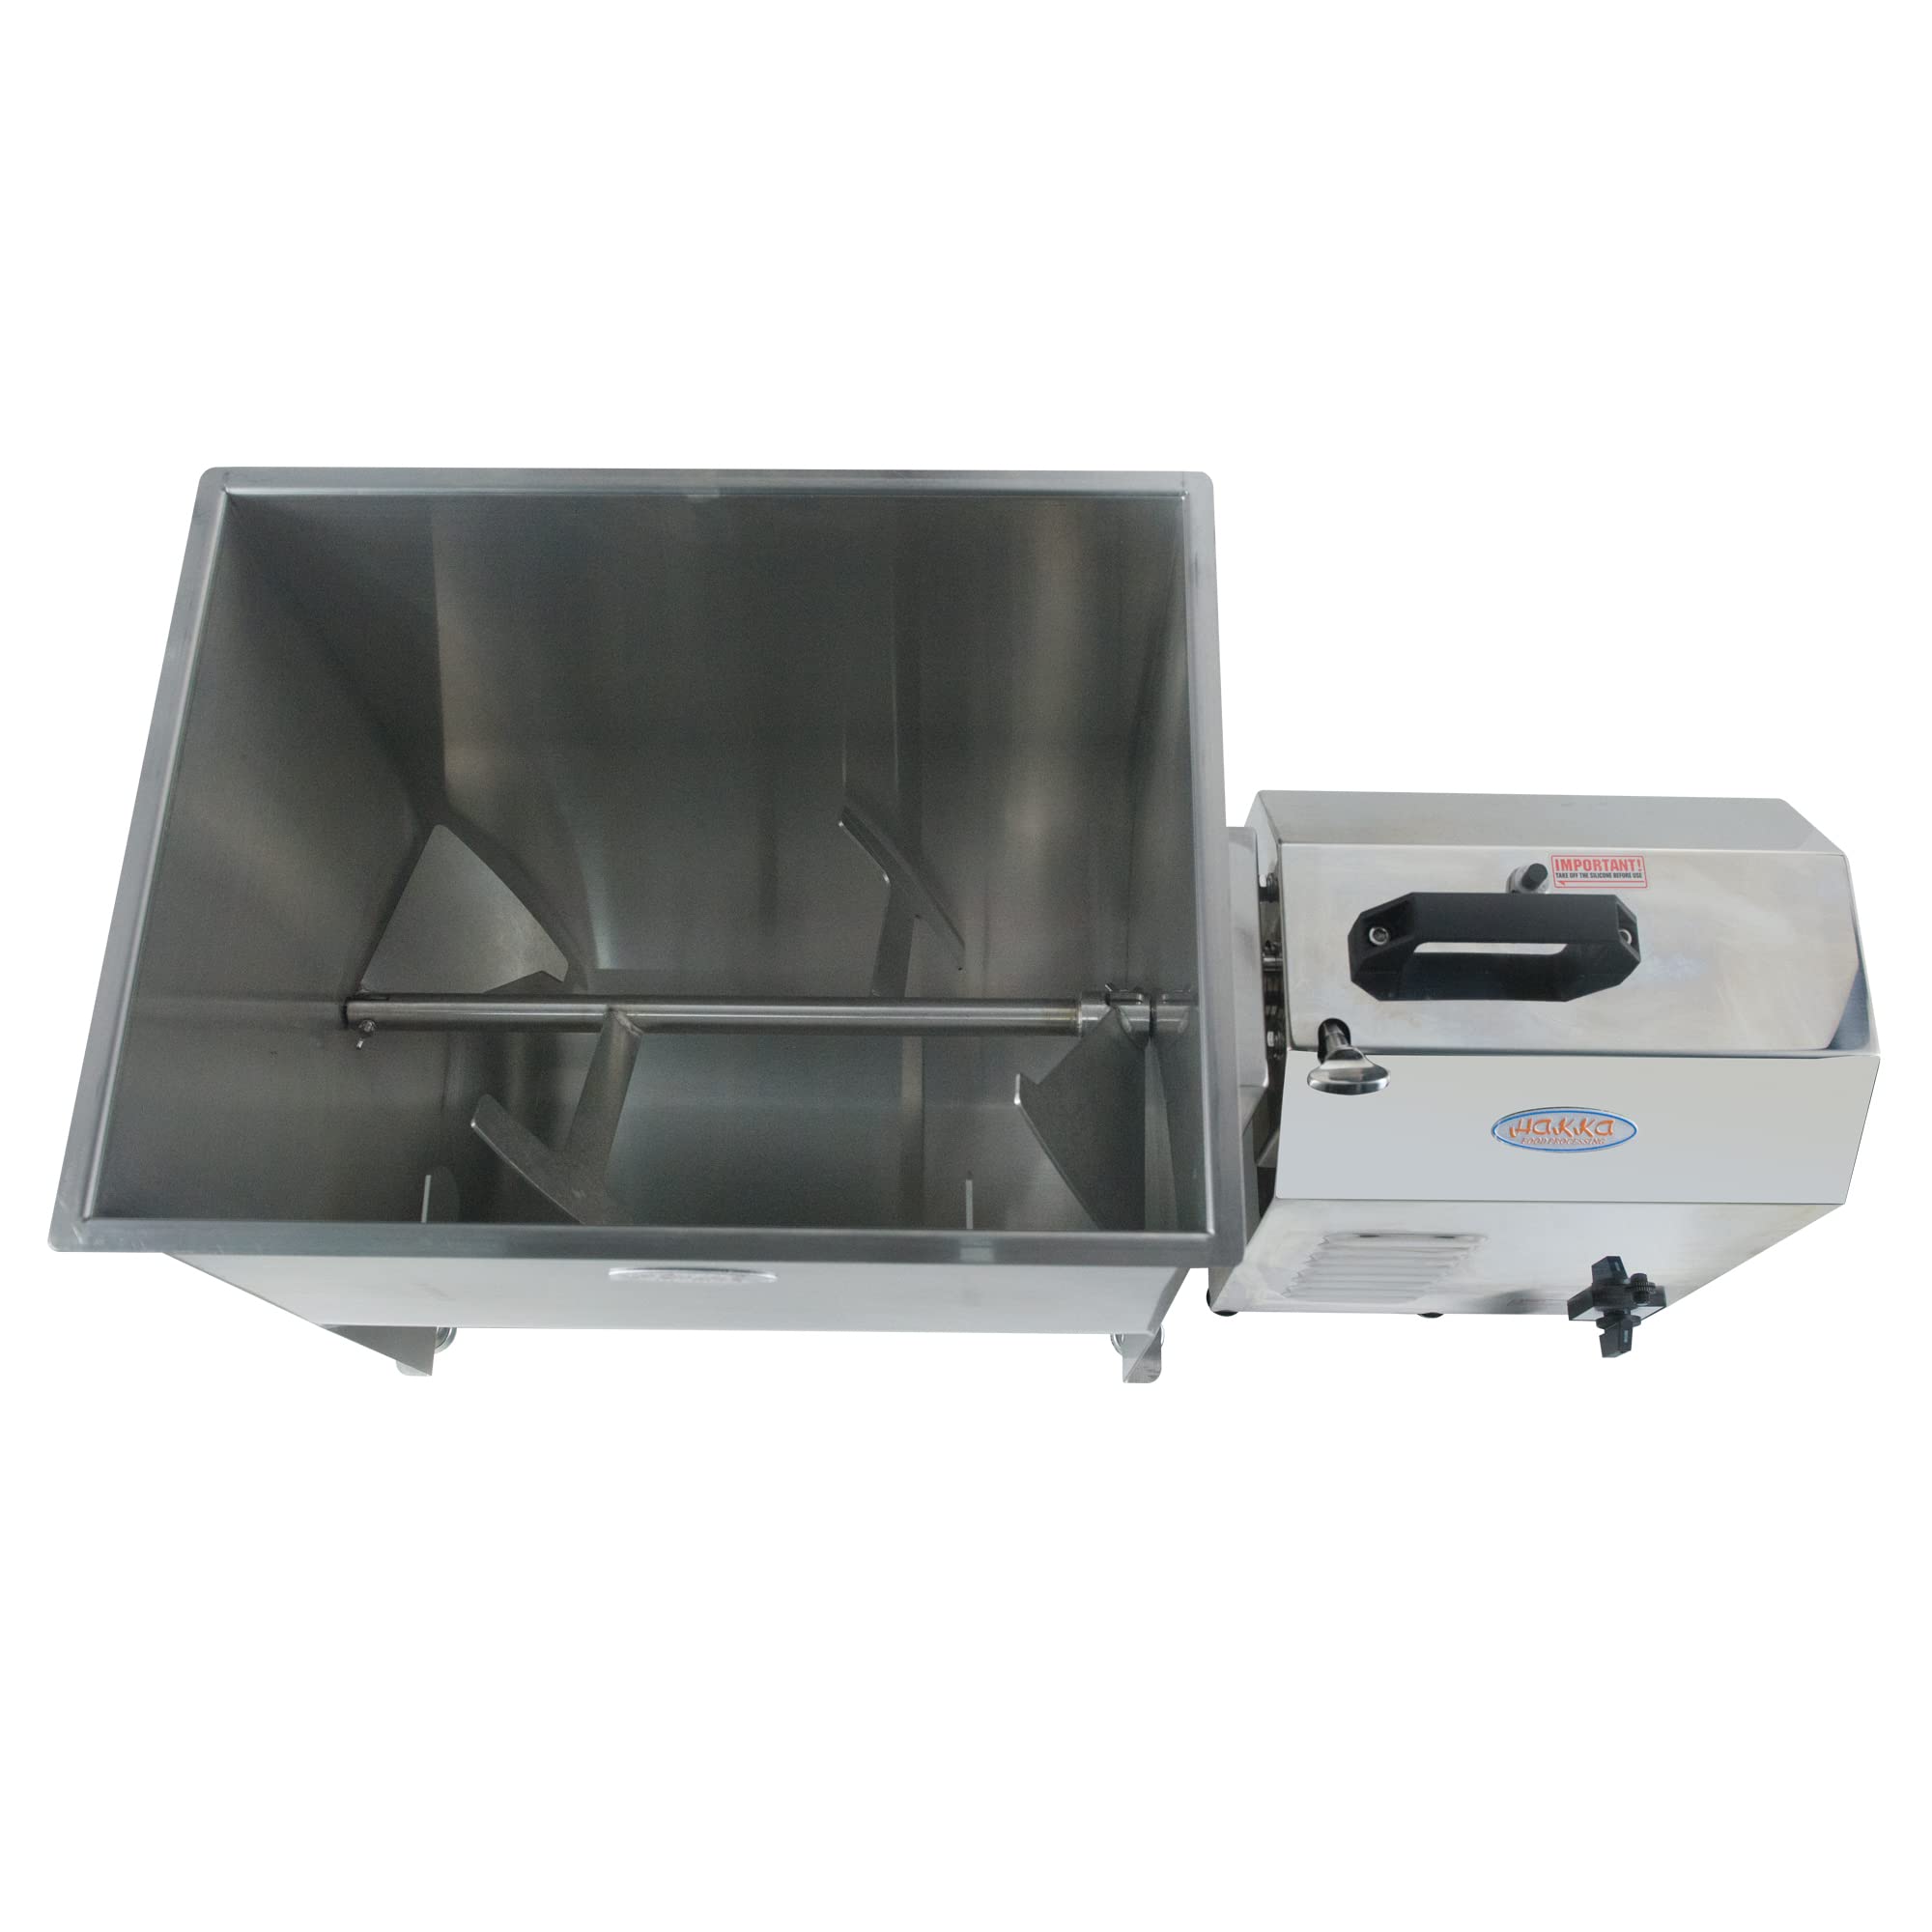 commercial electric meat mixing machine /